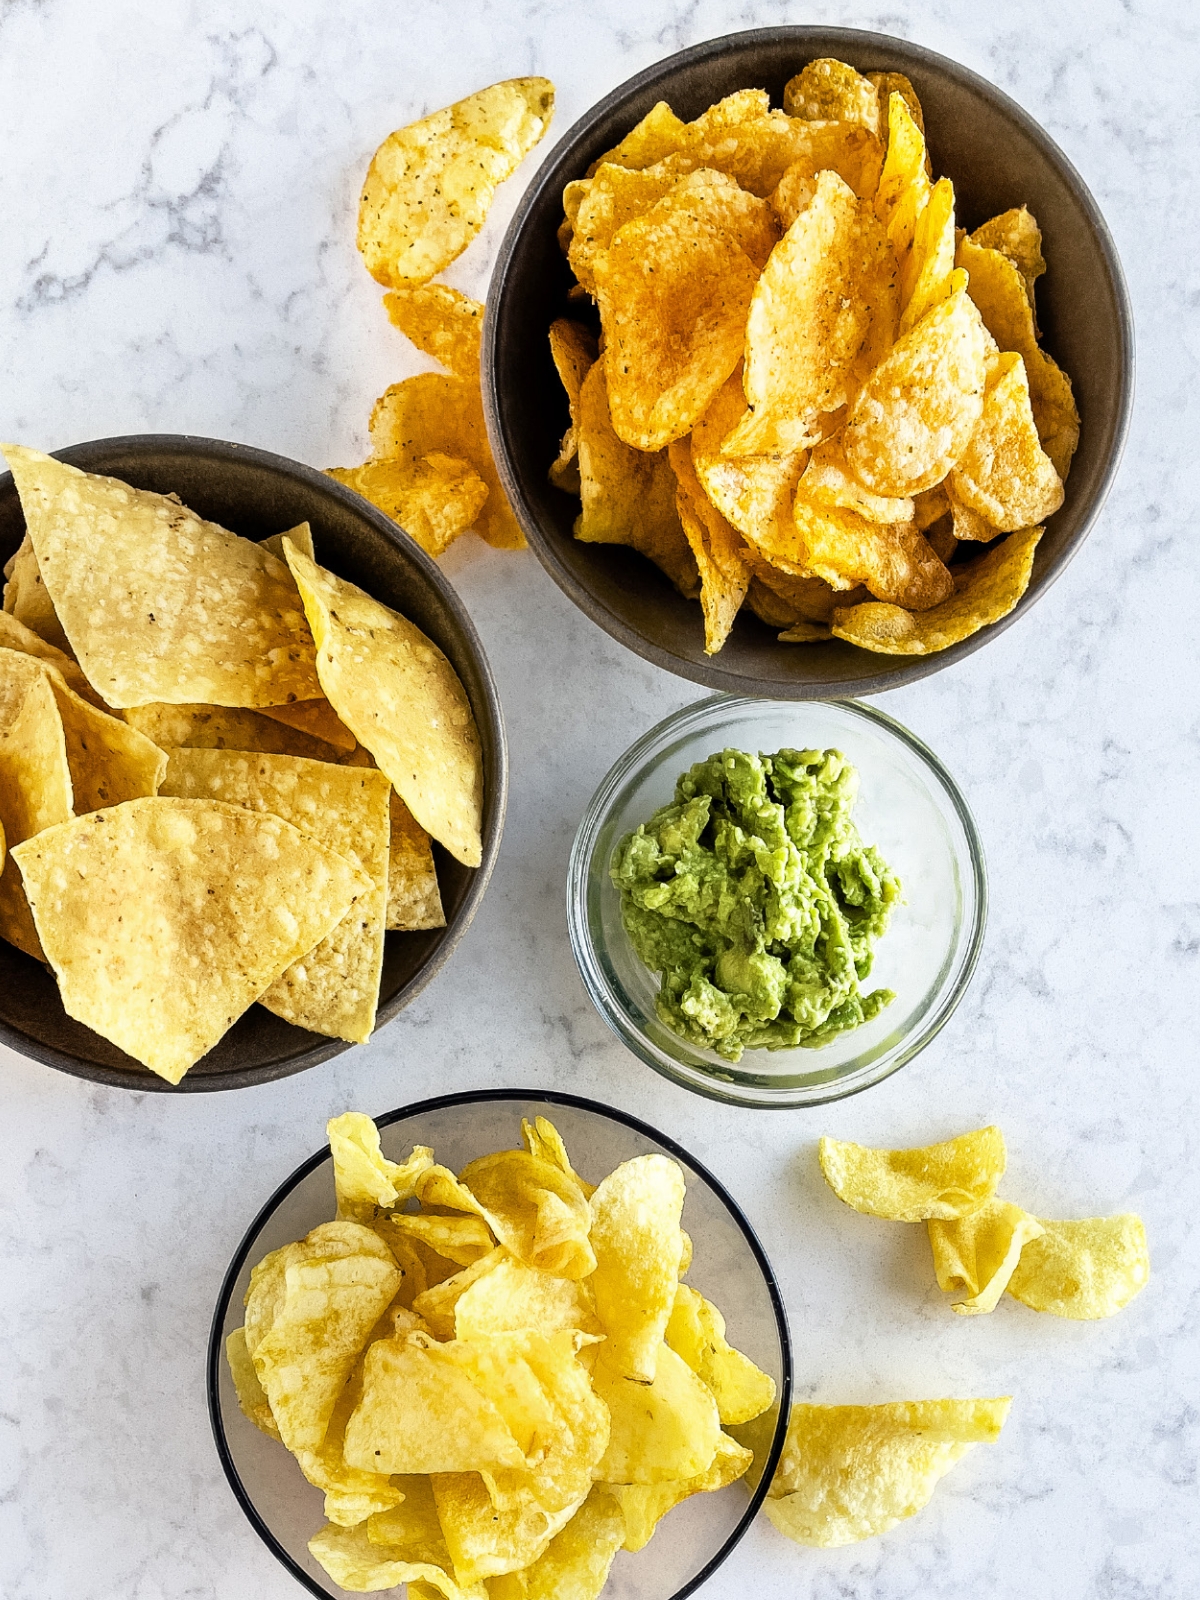 Three bowls of chips surrounding a bowl of guacamole